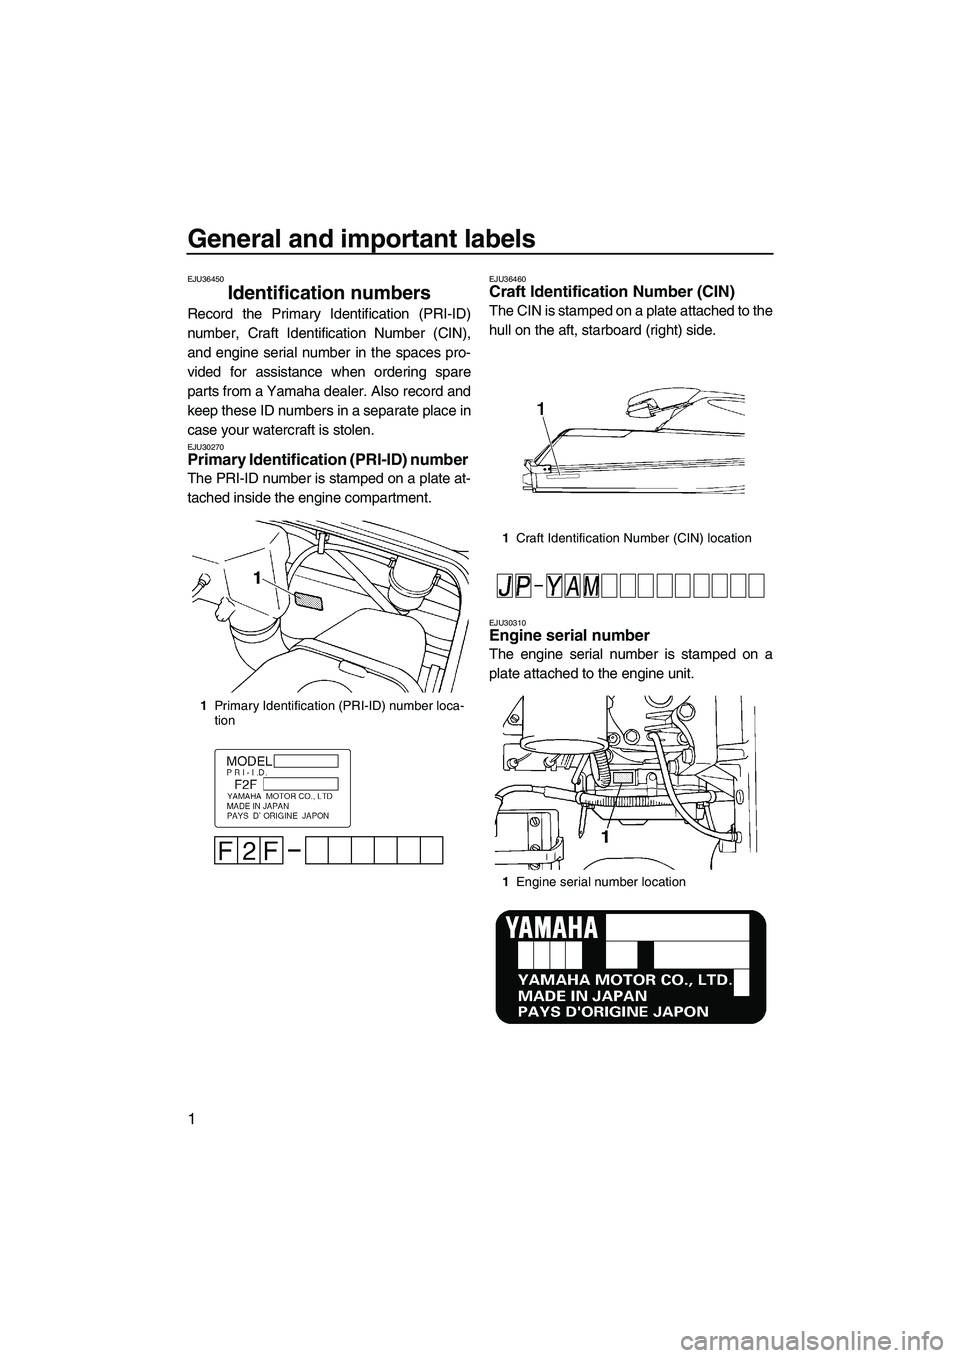 YAMAHA SUPERJET 2008  Owners Manual General and important labels
1
EJU36450
Identification numbers 
Record the Primary Identification (PRI-ID)
number, Craft Identification Number (CIN),
and engine serial number in the spaces pro-
vided 